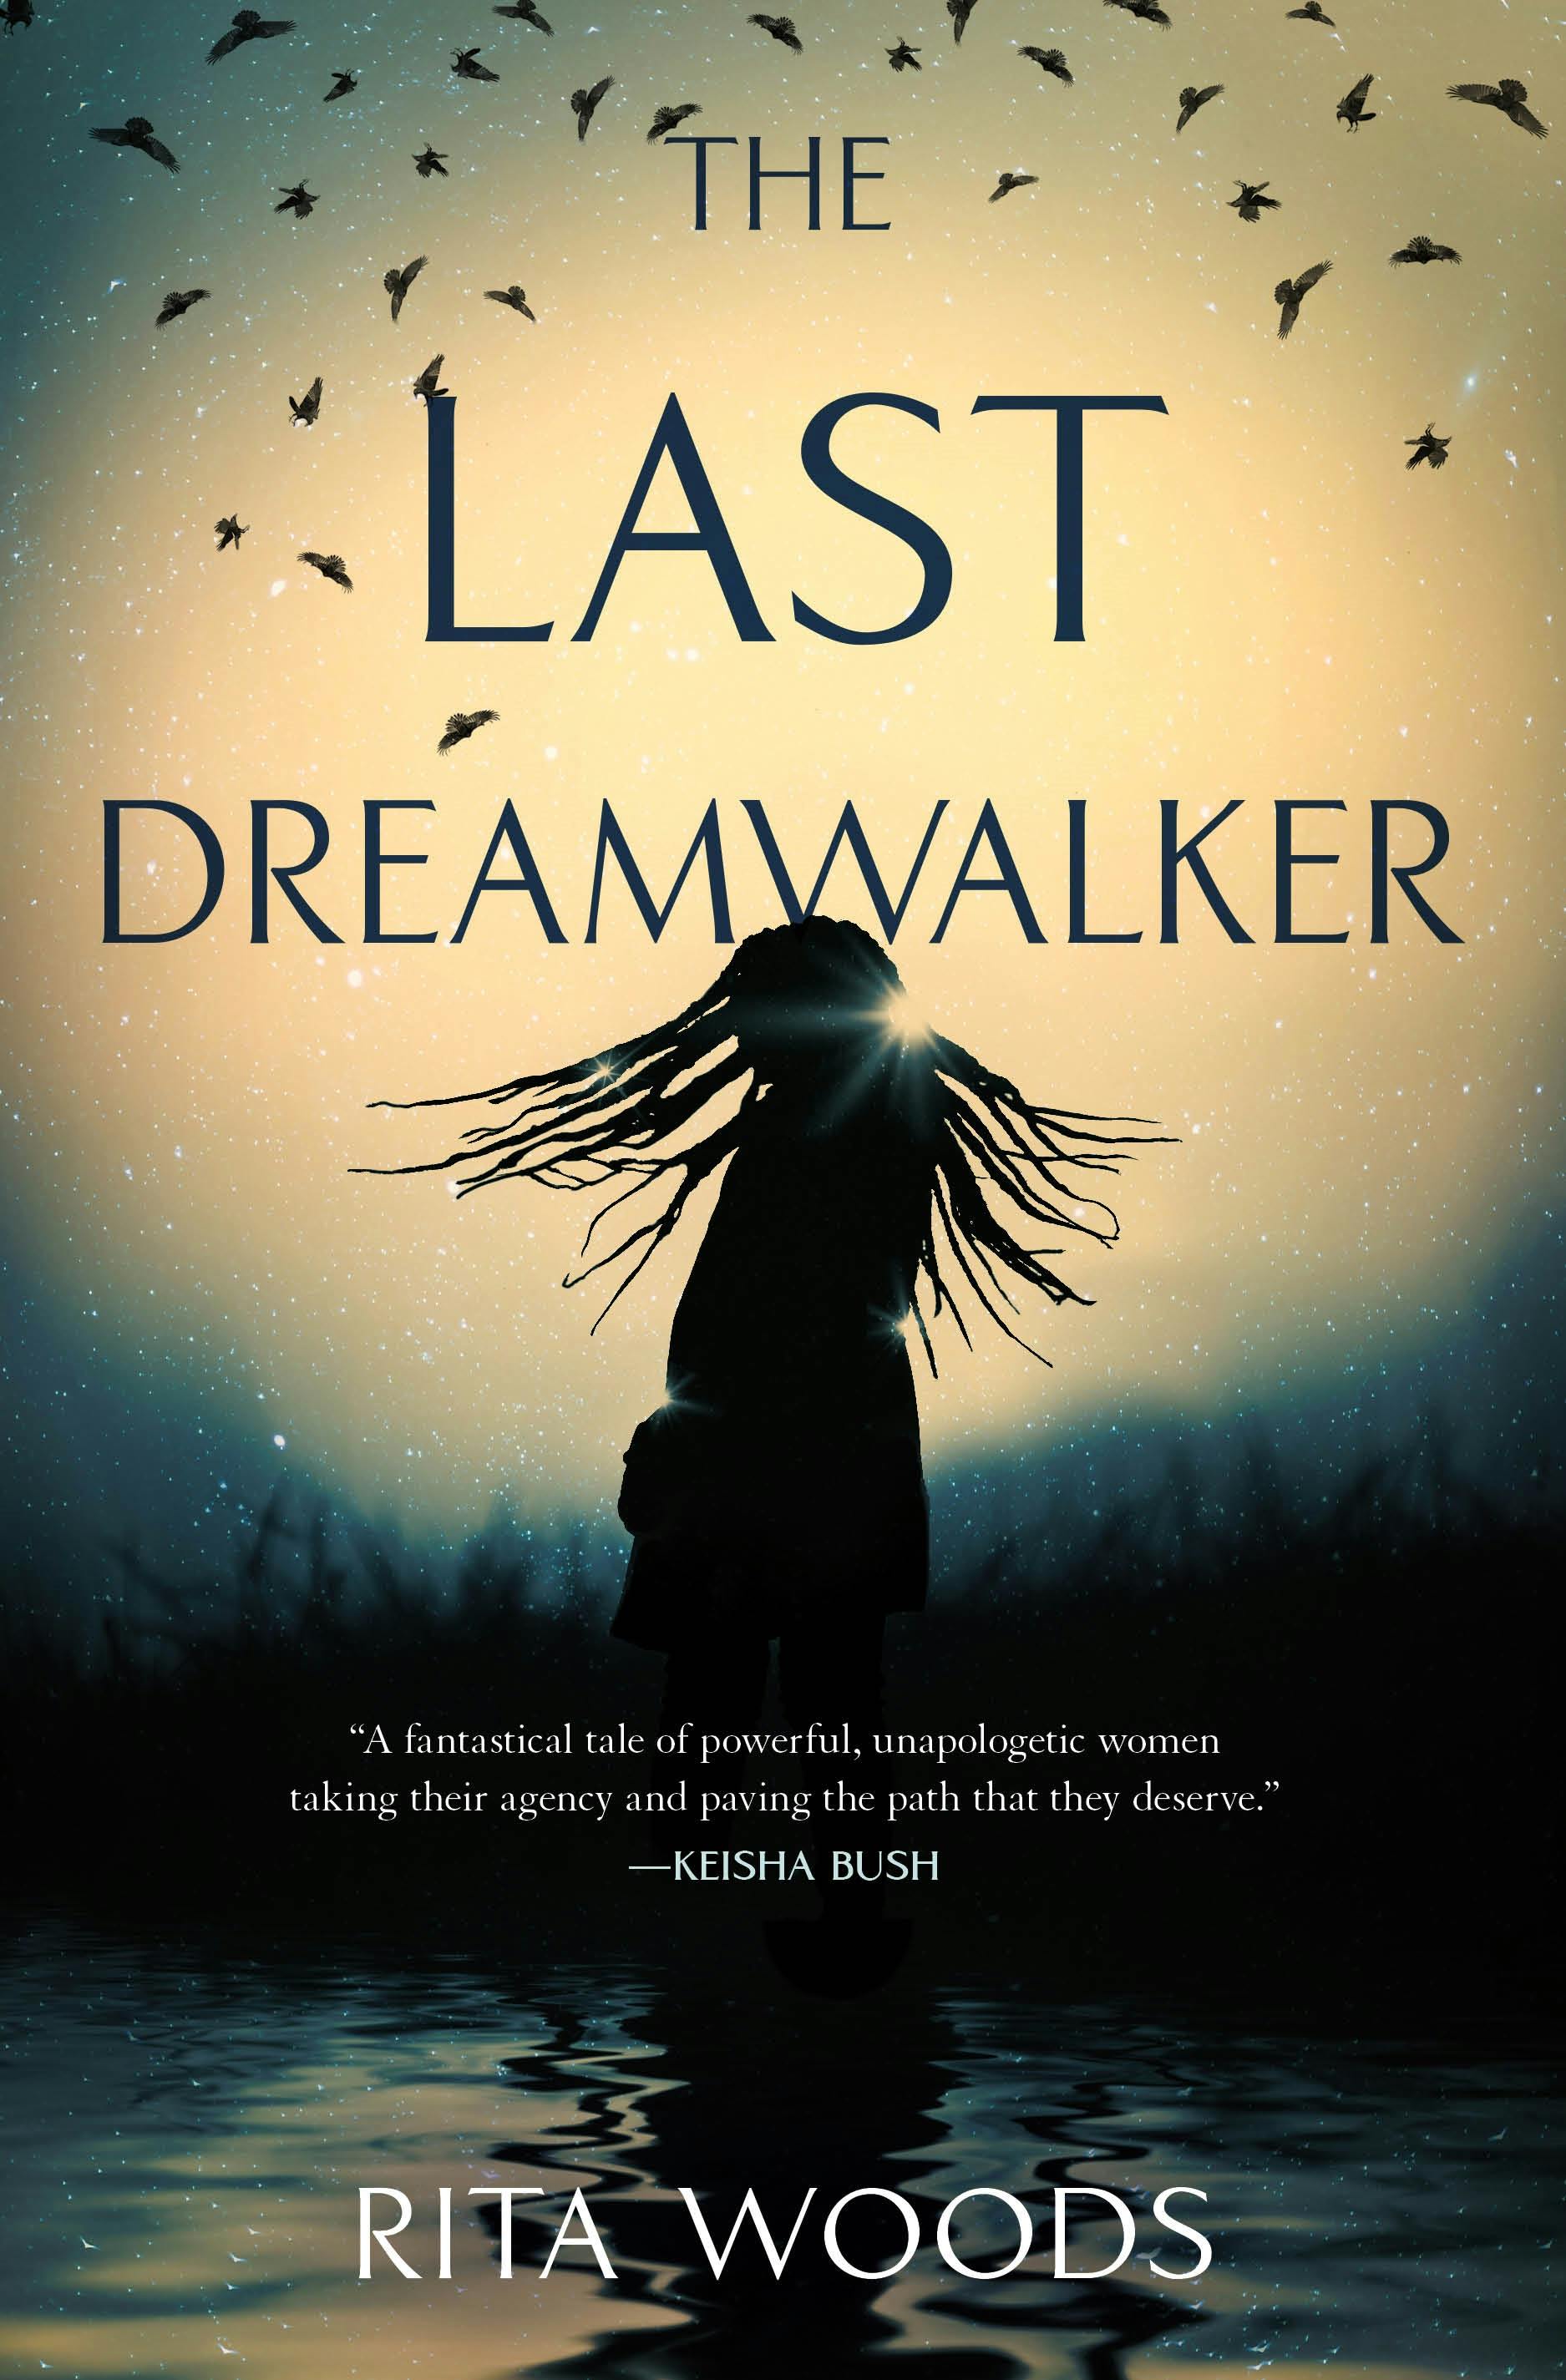 Cover for the book titled as: The Last Dreamwalker